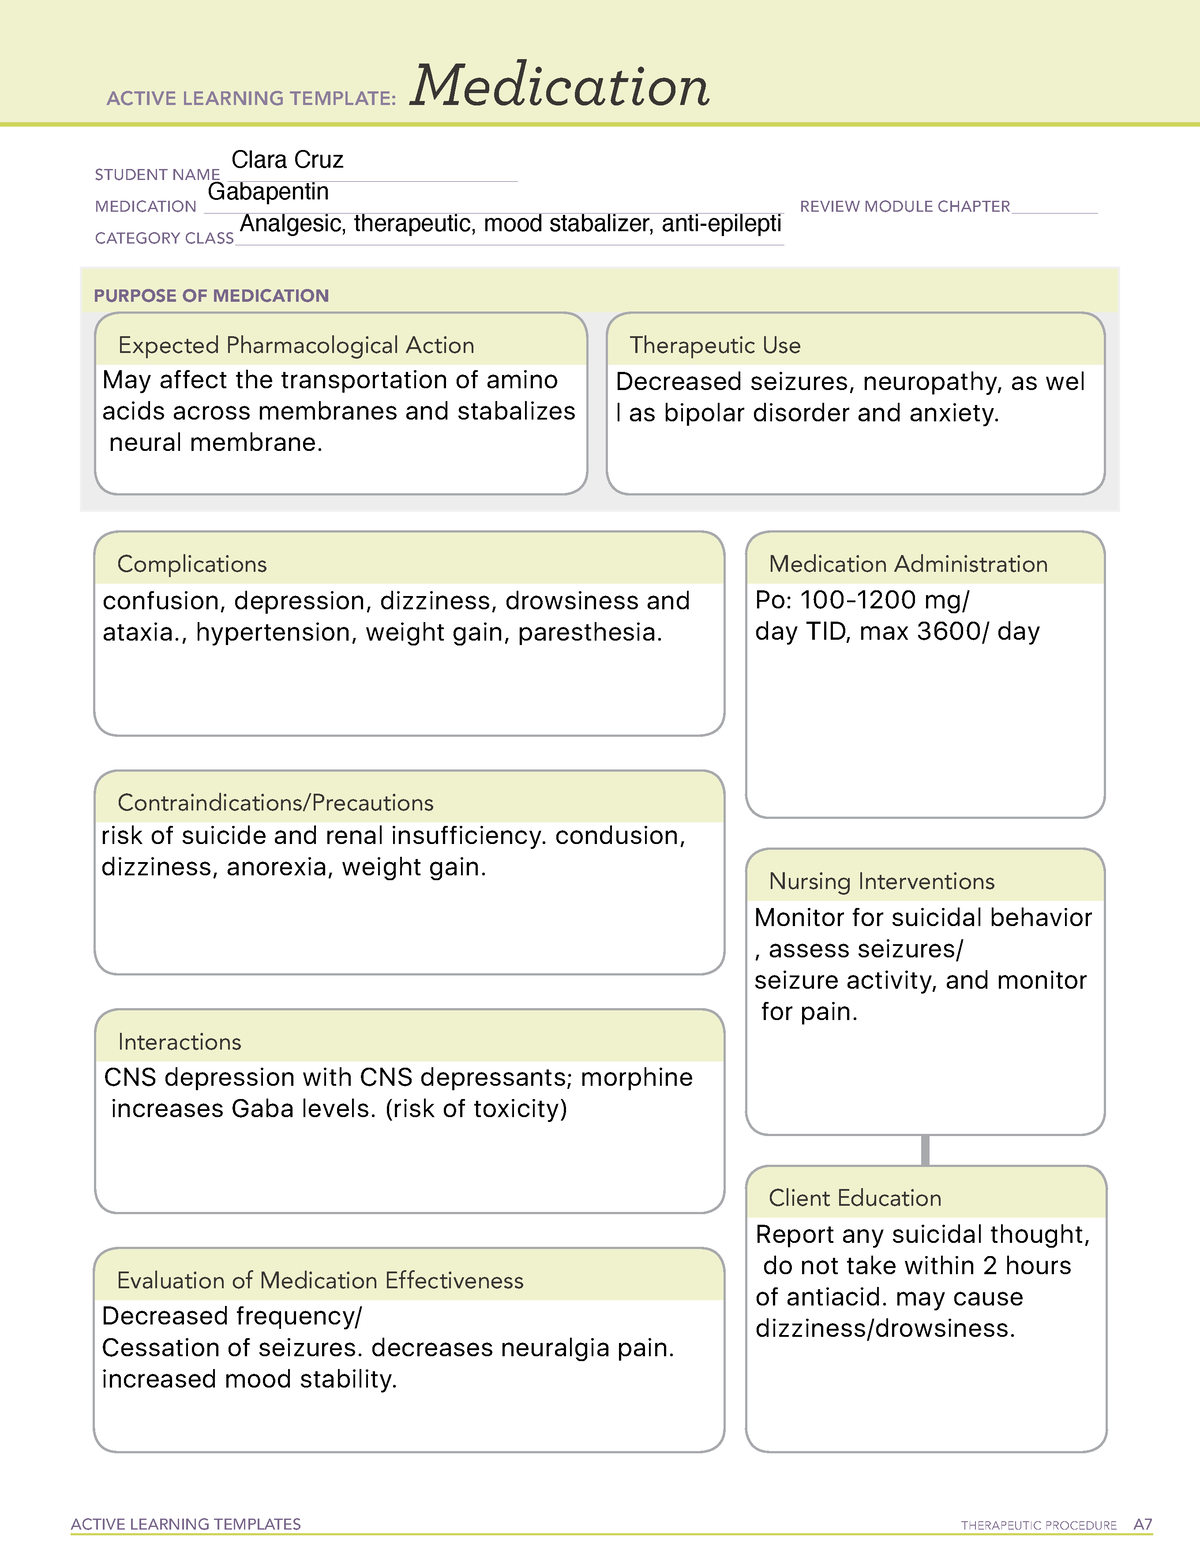 Med Card Gabapentin ACTIVE LEARNING TEMPLATES THERAPEUTIC PROCEDURE A Medication STUDENT NAME